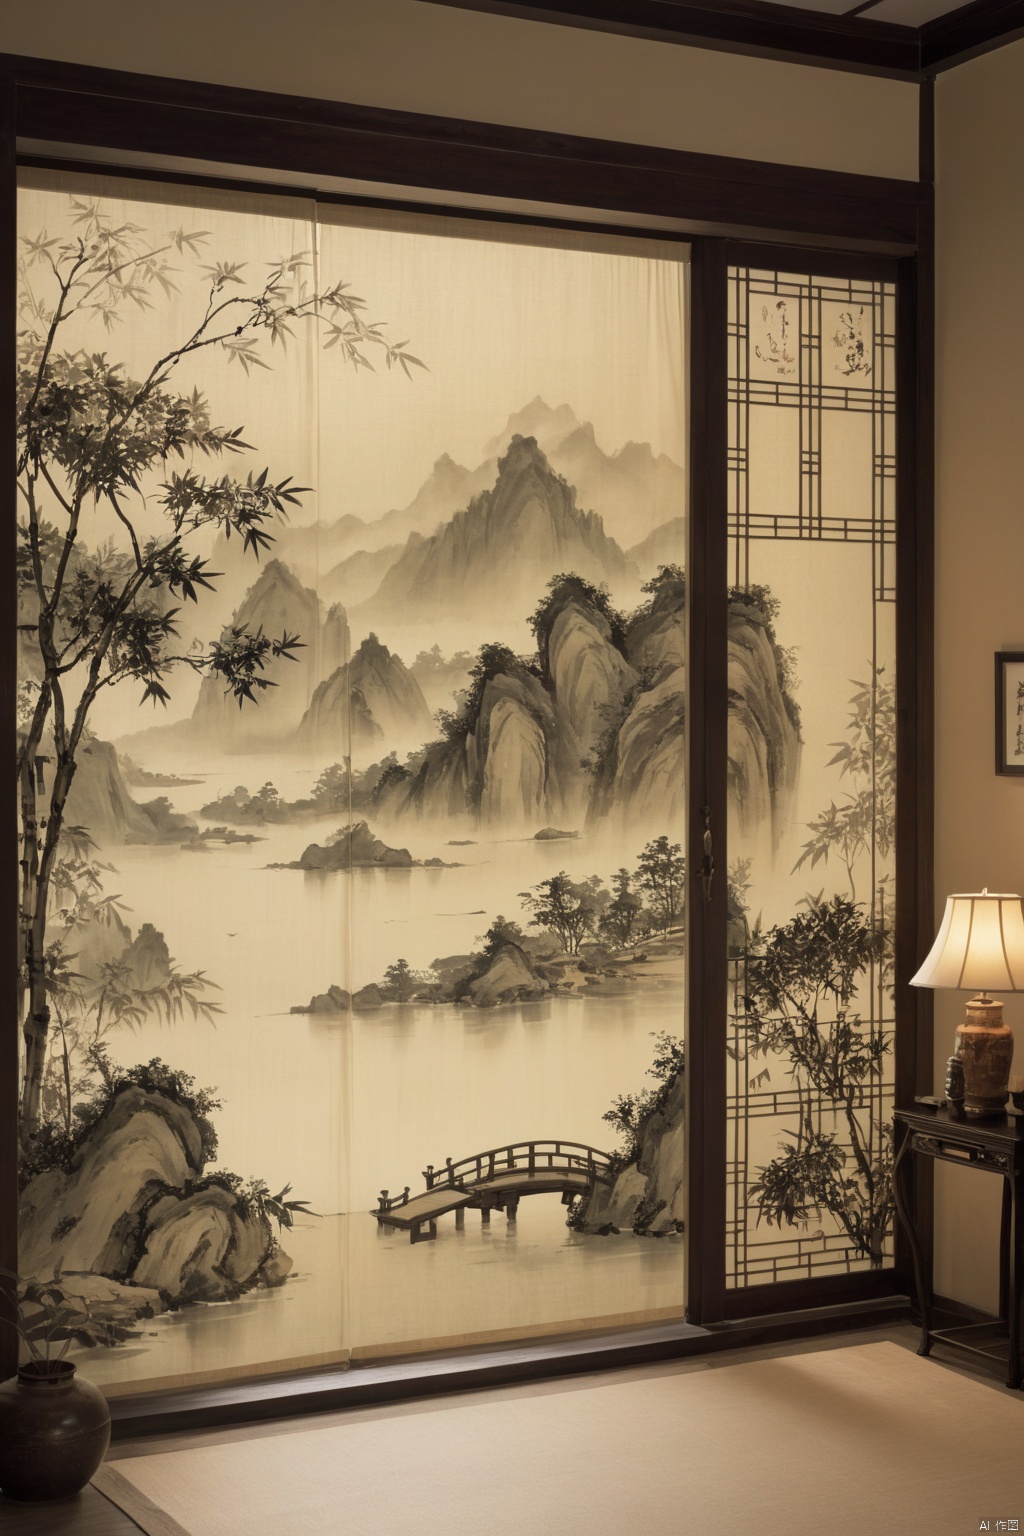 black ink painting, Three-dimensional sense, light and shadow tracing, Chinese-style bamboo light-transmitting screen with gauze curtain, the sky in the distance, hanging lamp, a Chinese-style wooden door on the right, adding details, high resolution, medium shot, natural light, transparency, curtains, floating gauze curtain, cool texture, screen window, warm colors, transparency, Chinese landscape scenery, warm colors, Chinese-style bedroom, free play, relatively harsh sunshine, jingjing